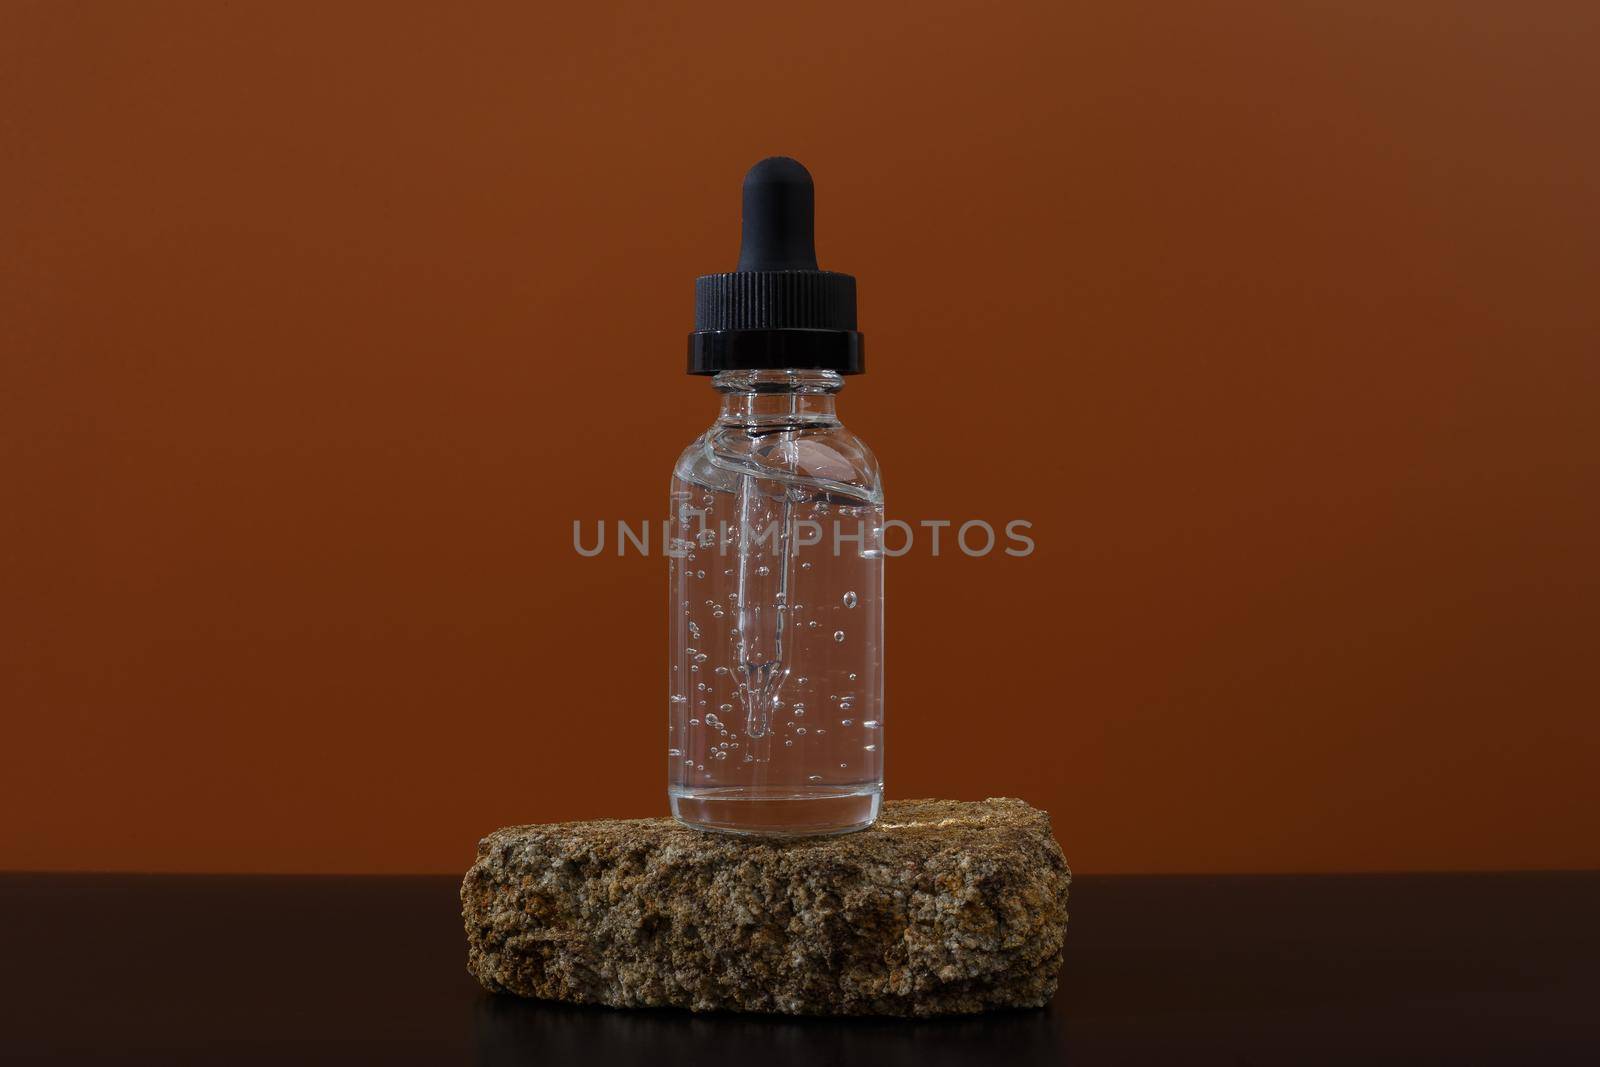 Anti aging or hydrating skin serum in transparent bottle on a stone and black table against brown background by Senorina_Irina